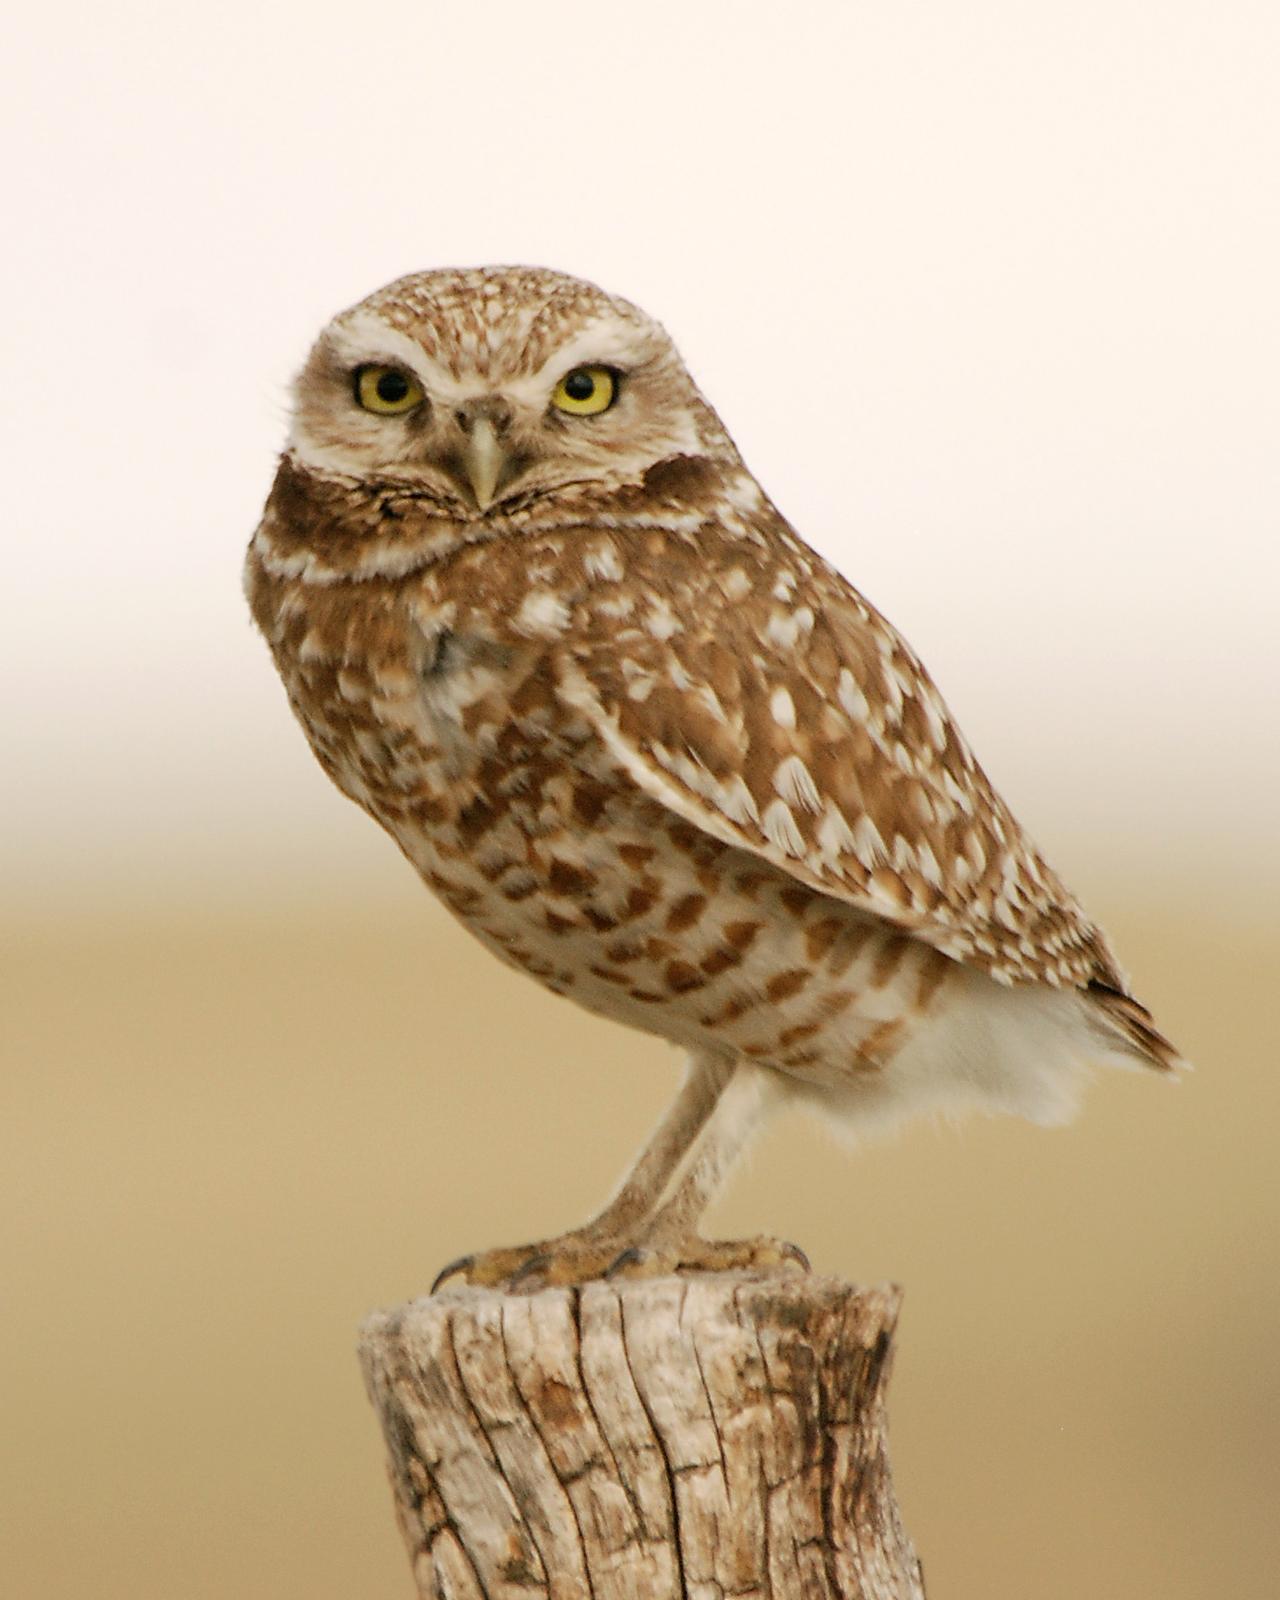 Burrowing Owl Photo by Ryan P. O'Donnell